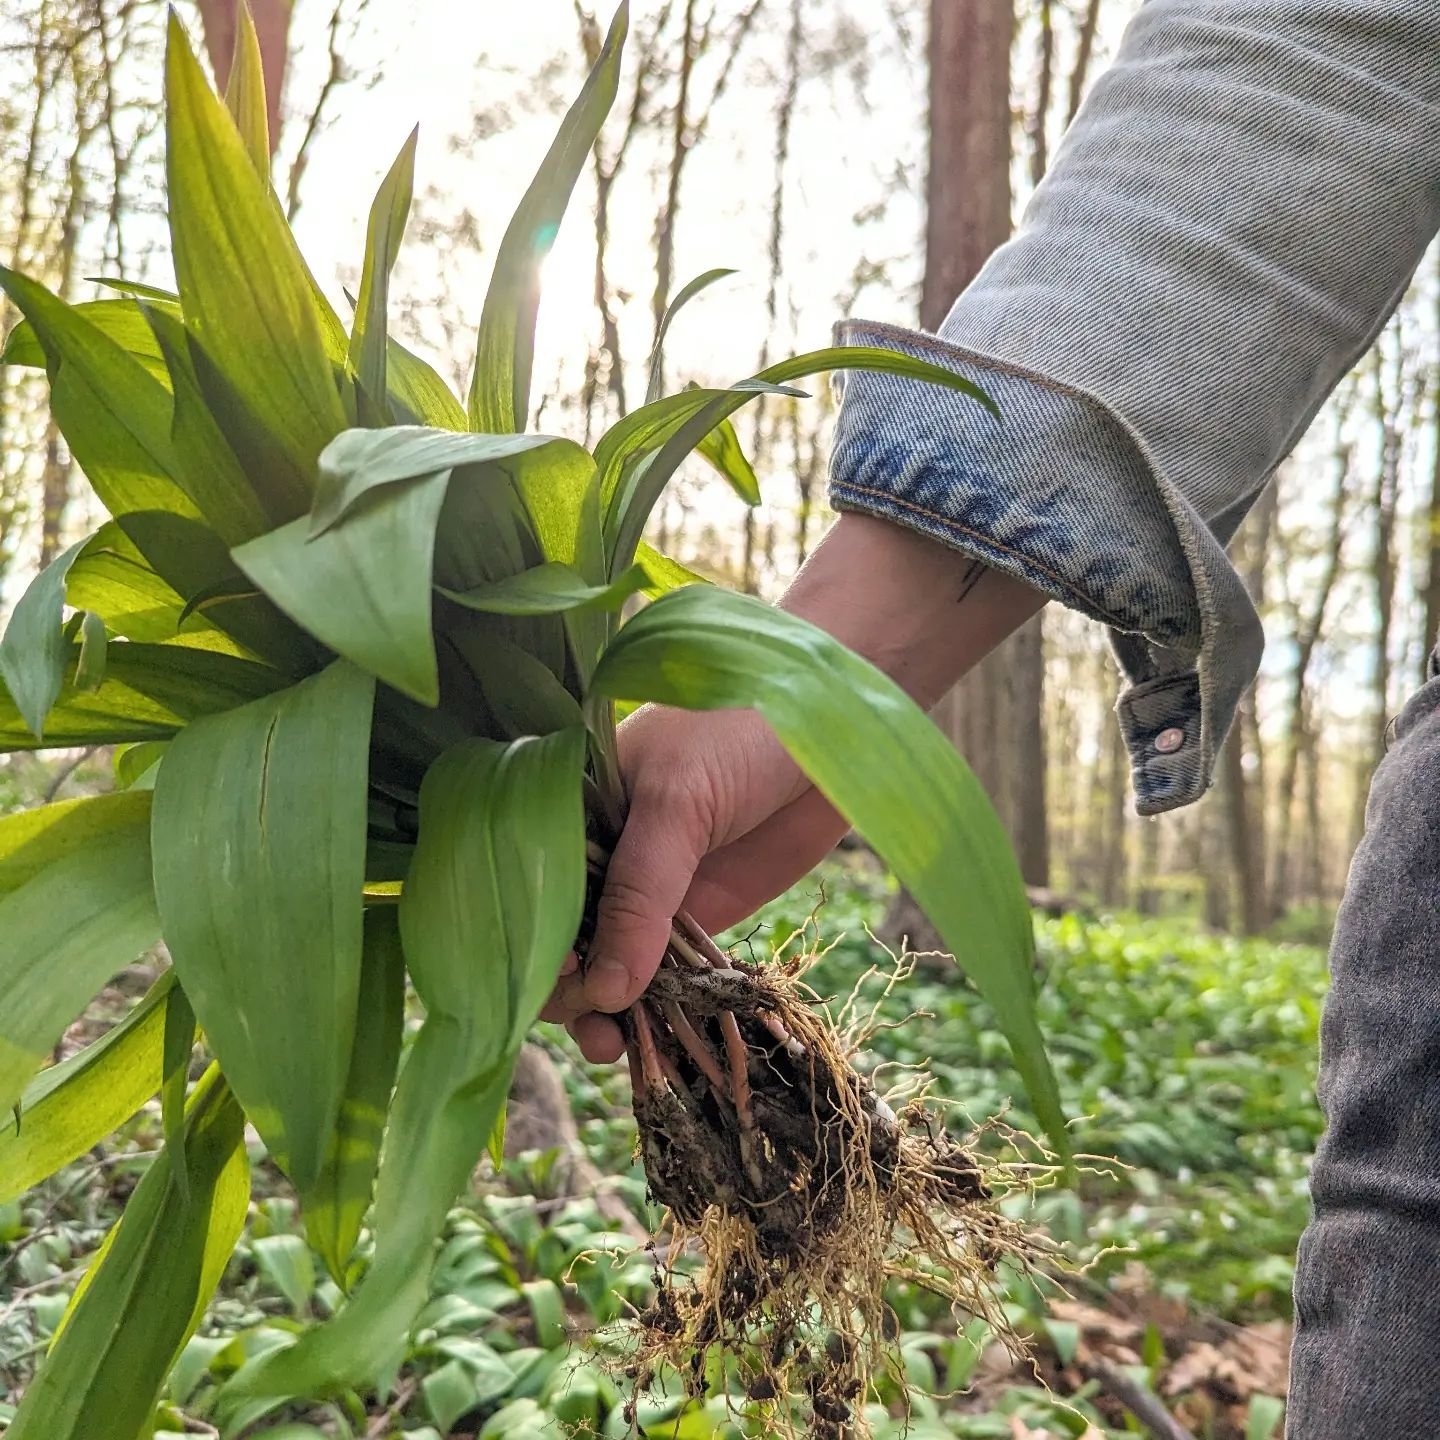 We had a great time harvesting ramps this year and want to share our process and appreciation for this humble plant.

Native to the area, ramps are some of the first edible plants to pop out of the ground every spring. Their early presence combined w